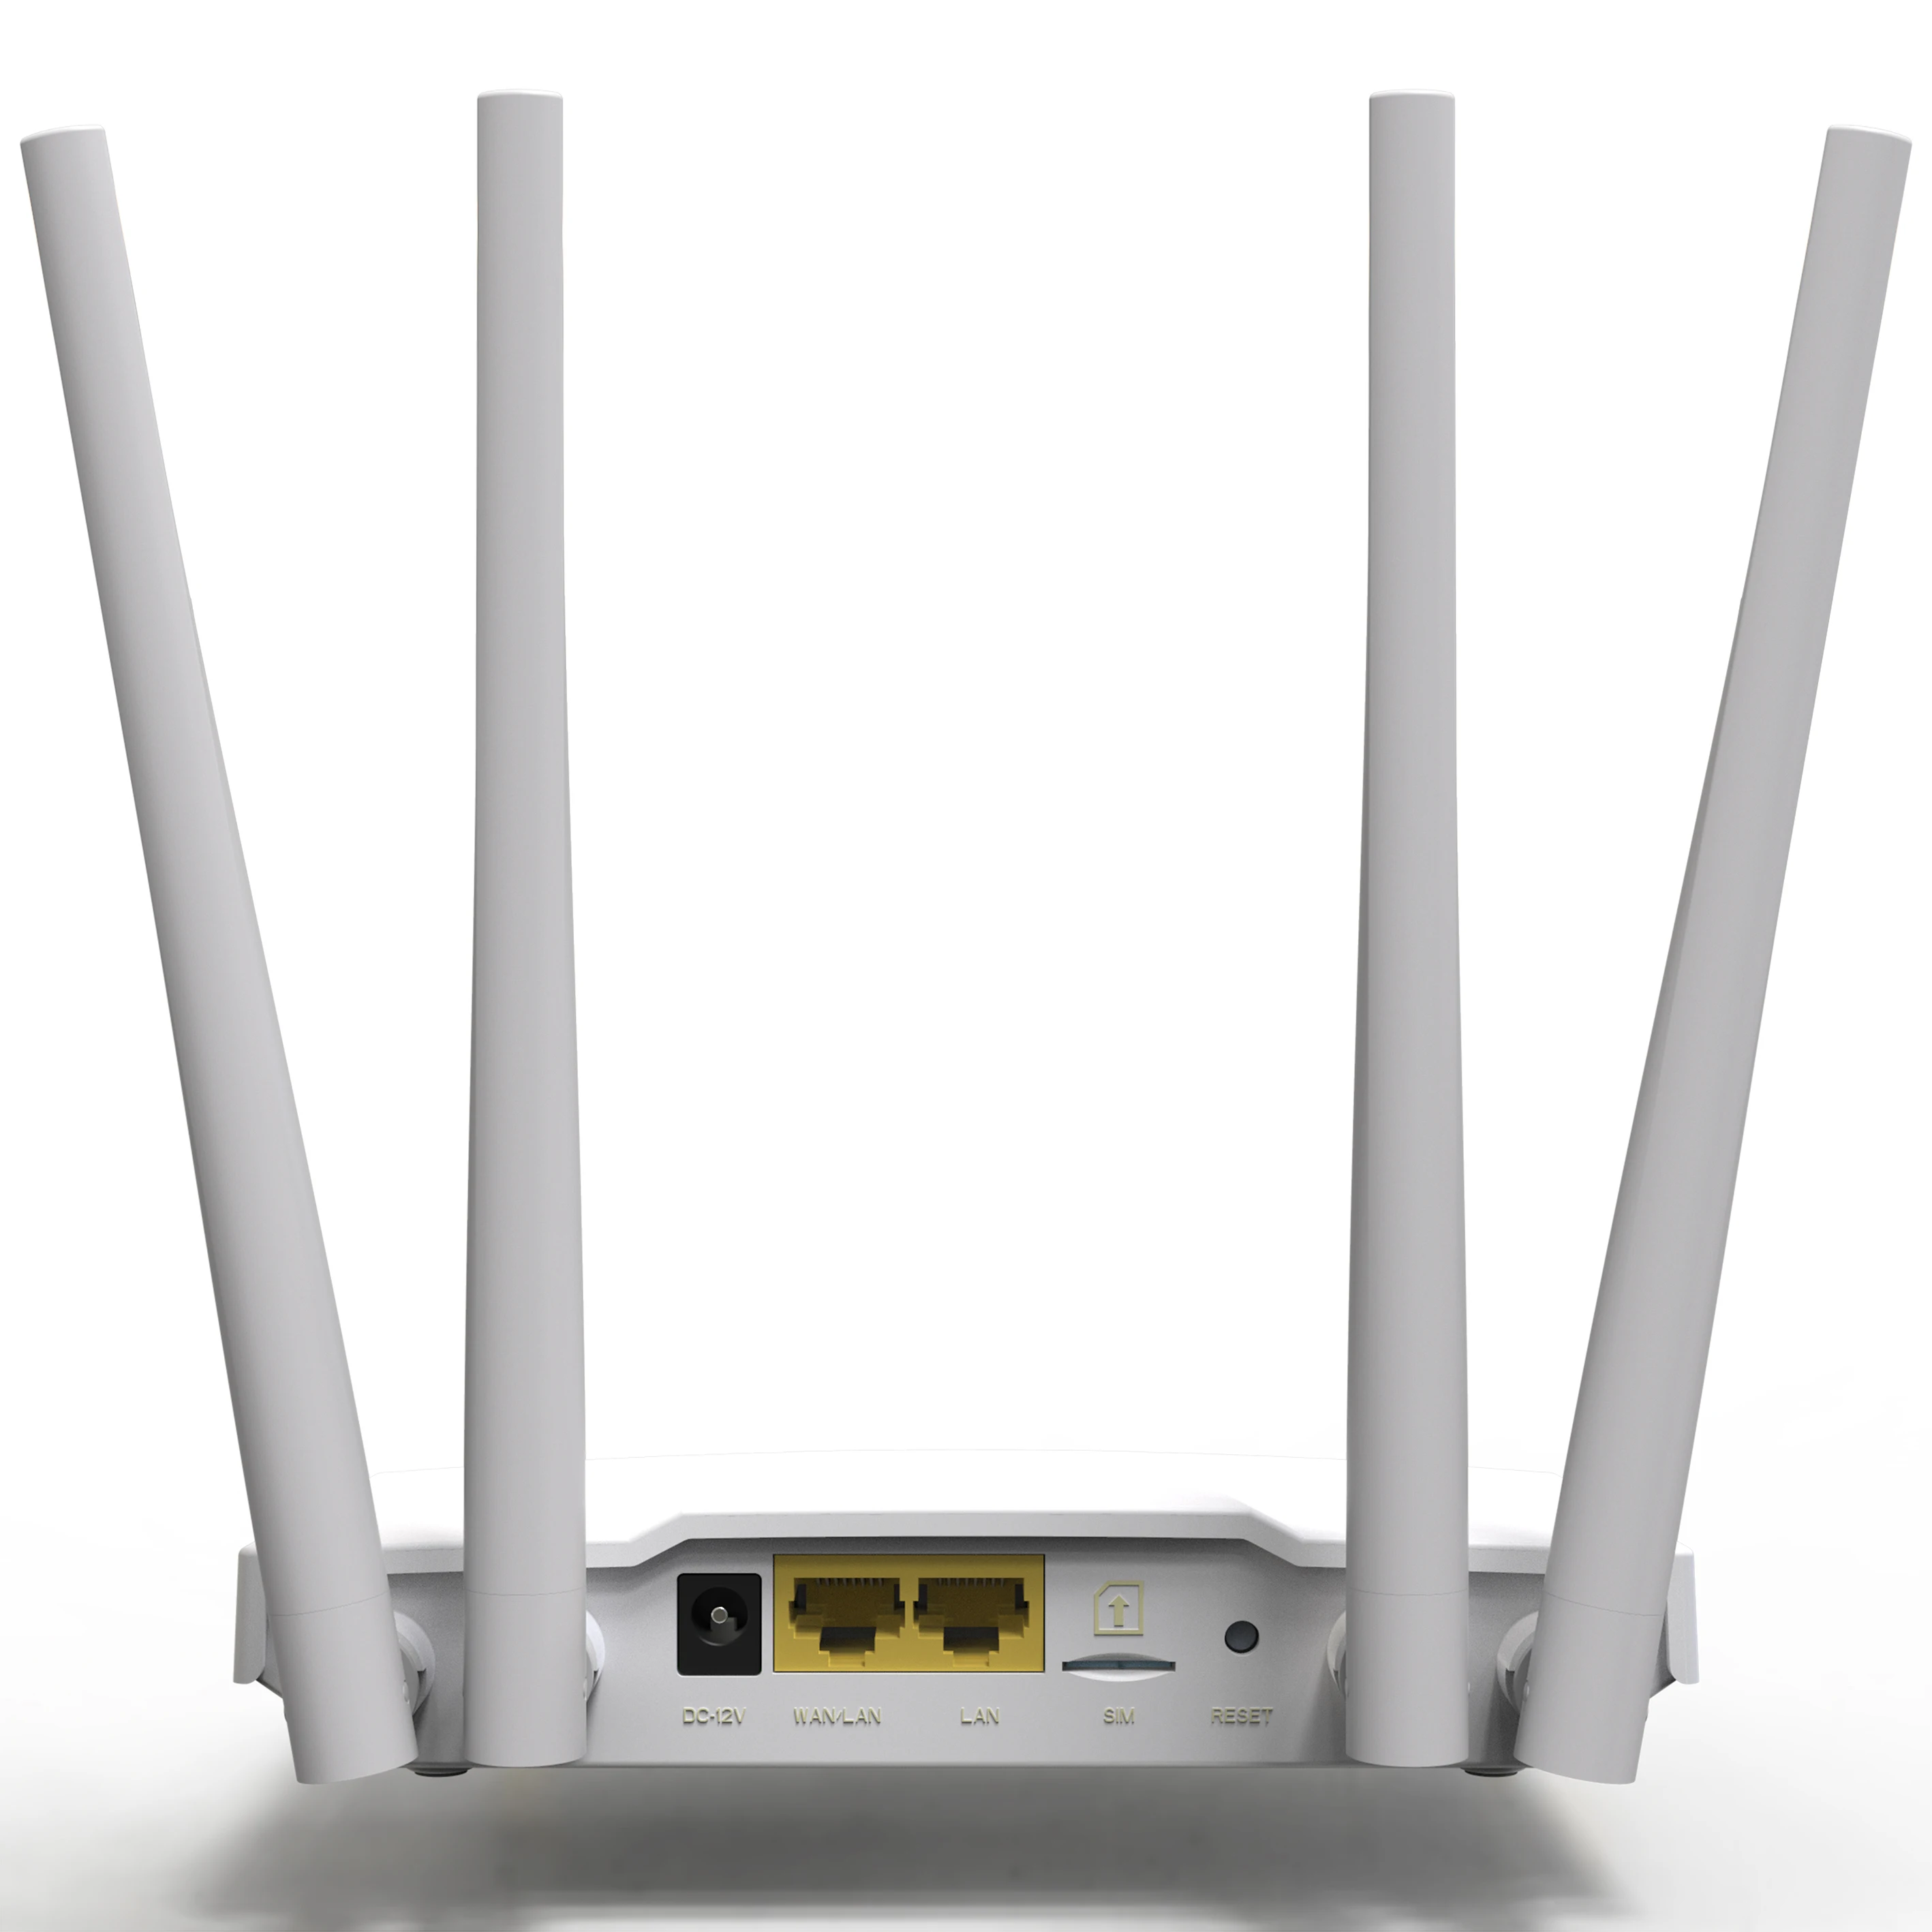 Cpe 4g wi fi. CPE 4g Wi-Fi роутер. Маршрутизатор lc112 LTE 4g CPE. CPE 4g Wireless Router lc112. 4g LTE CPE.